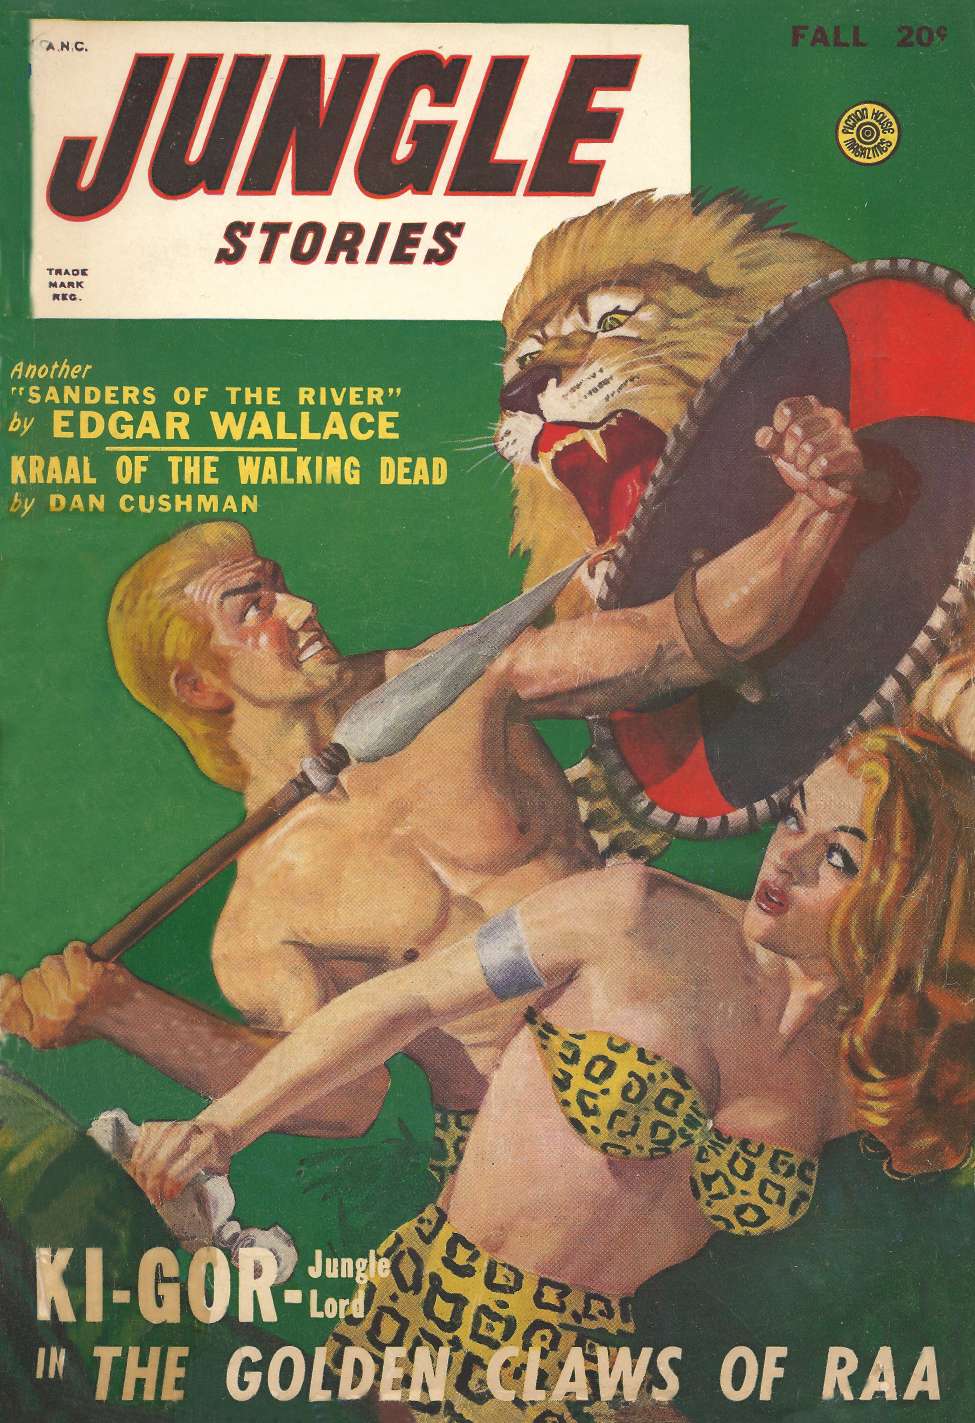 Book Cover For Jungle Stories v4 4 - The Golden Claws of Raa - John Peter Drummond